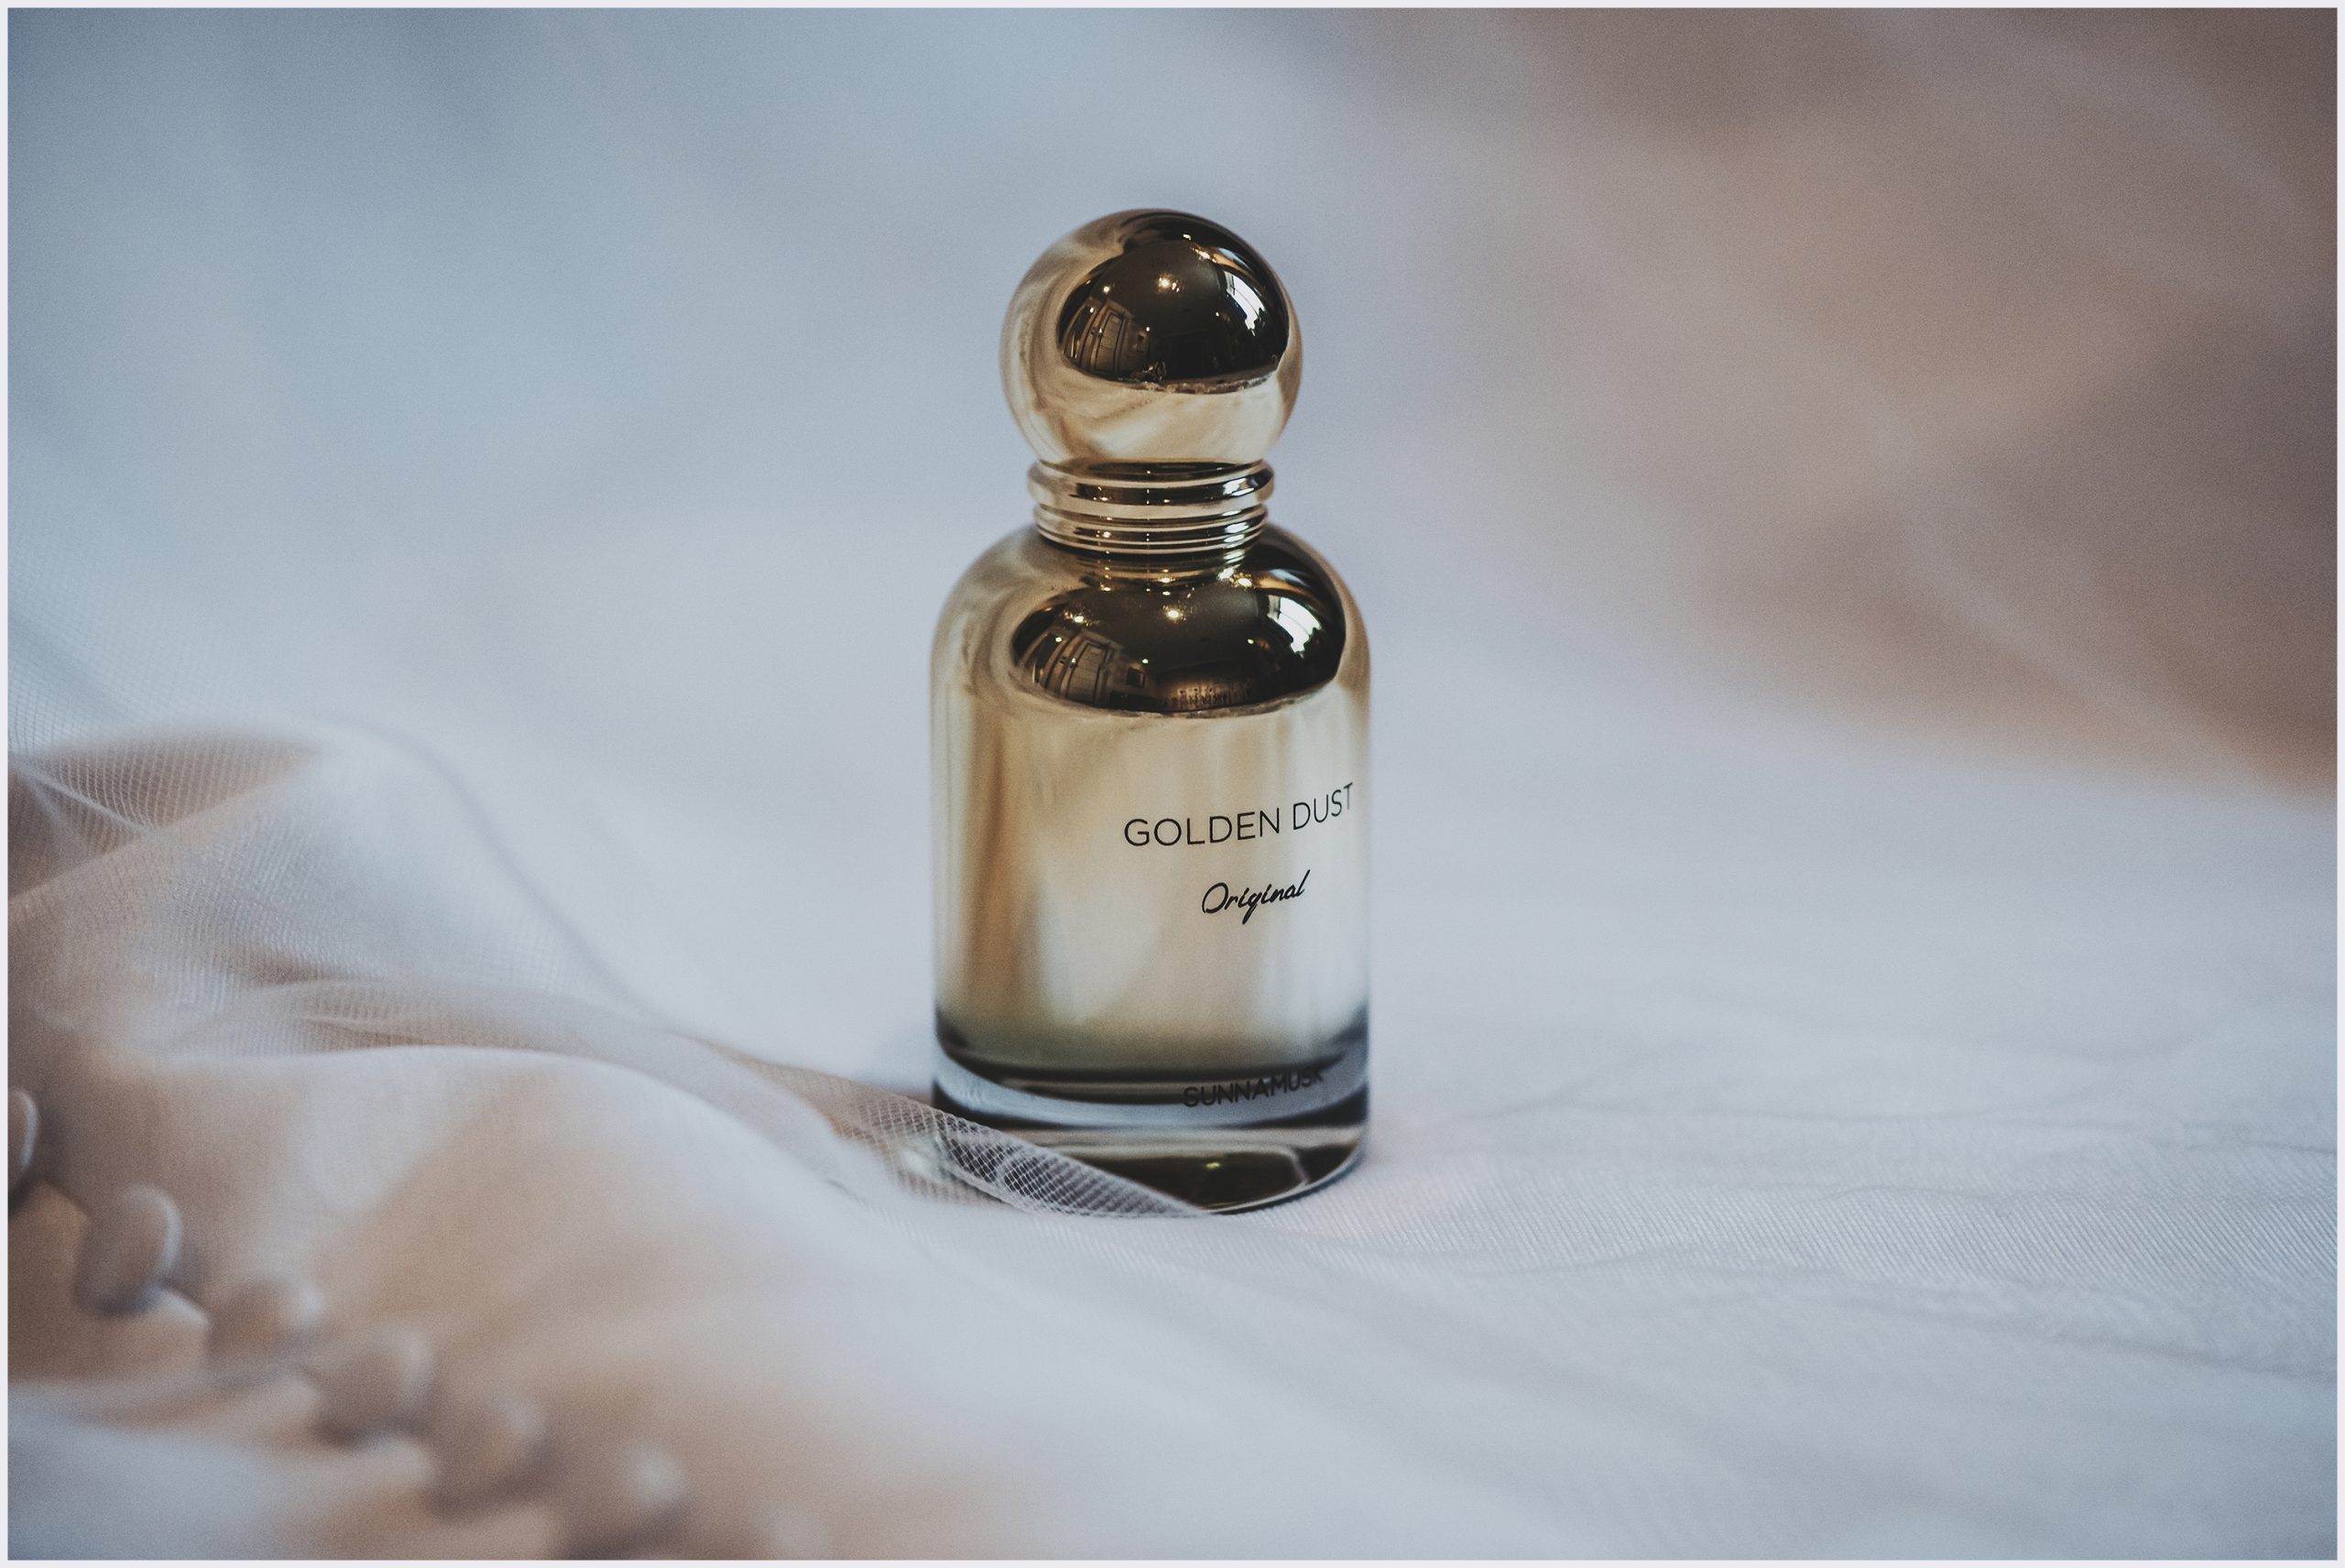 A bottle of Golden Dust perfume.  An image taken as part of wedding details at The Grosvenor Pulford Hotel and Spa